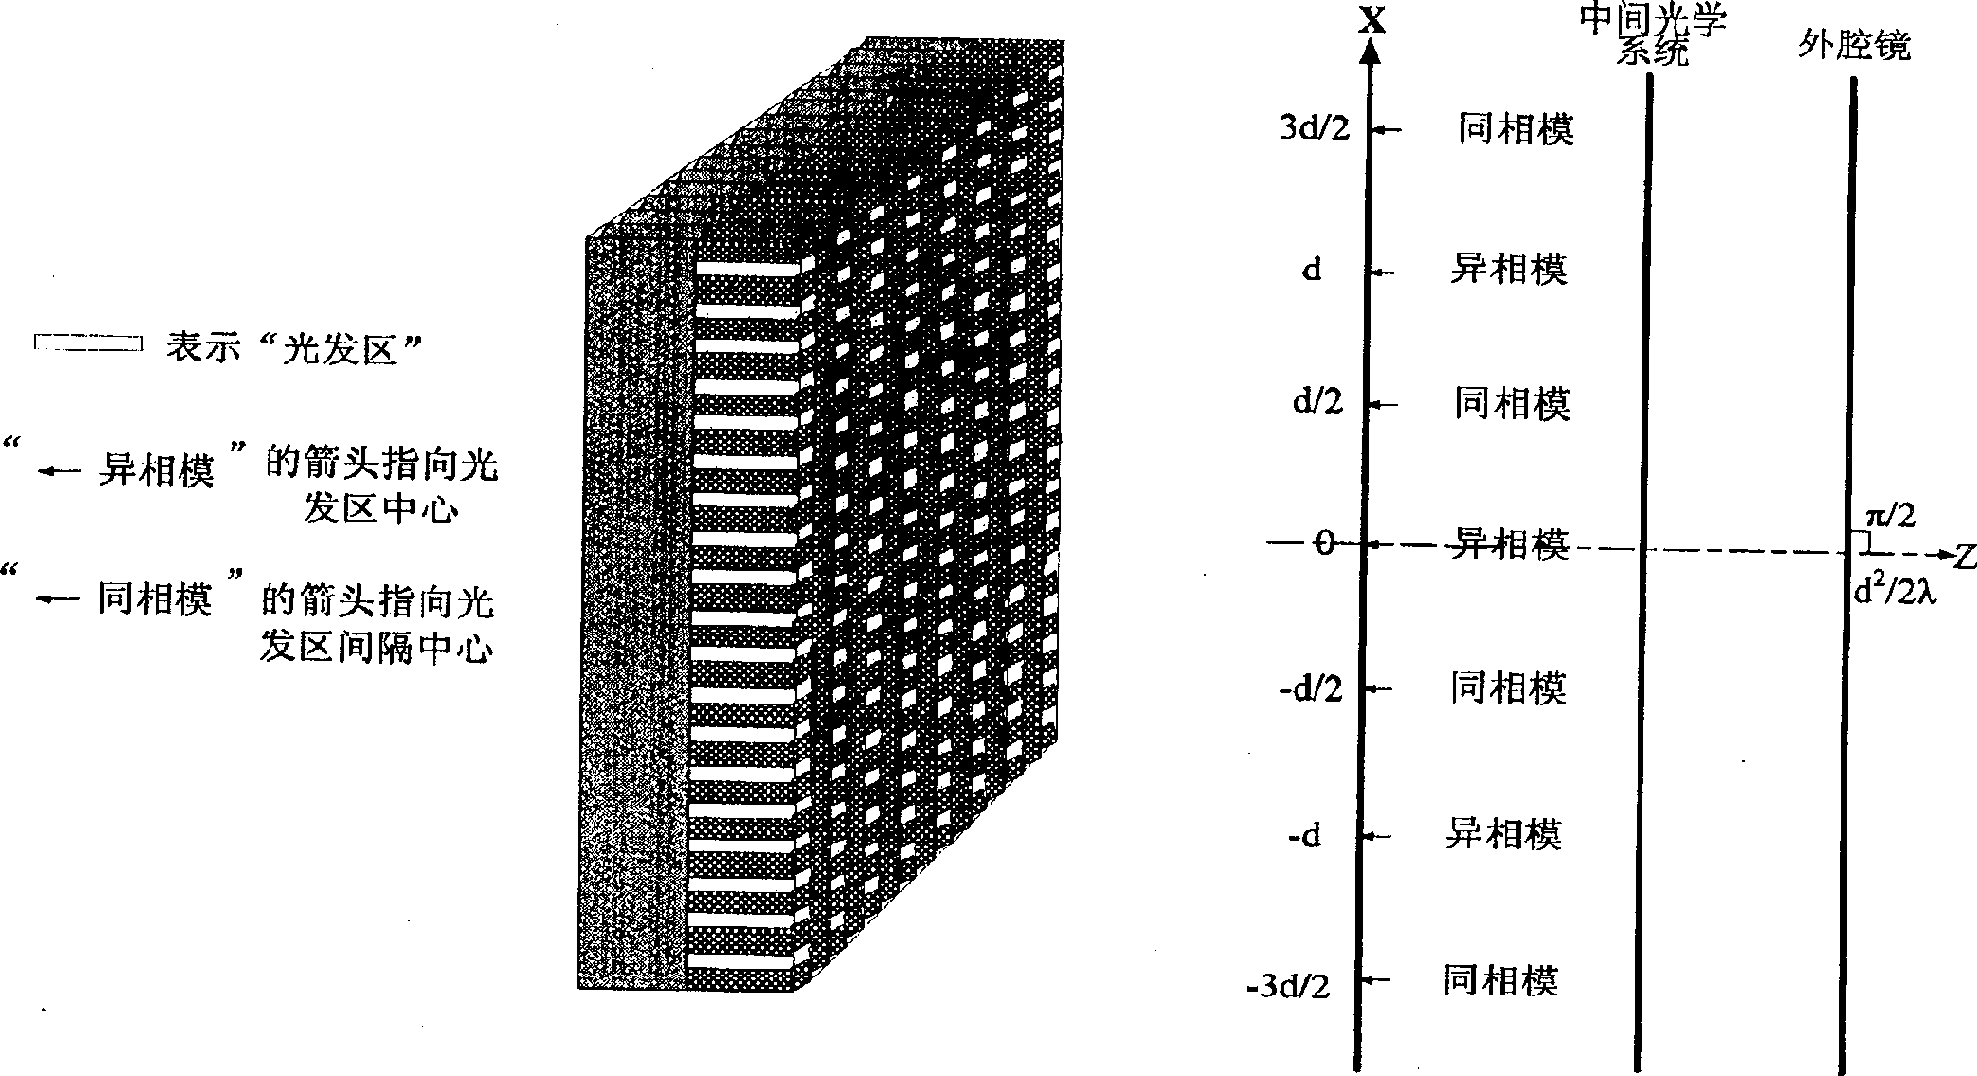 An ultra-large power semiconductor array cavity distortion sensing and detection compensation technology